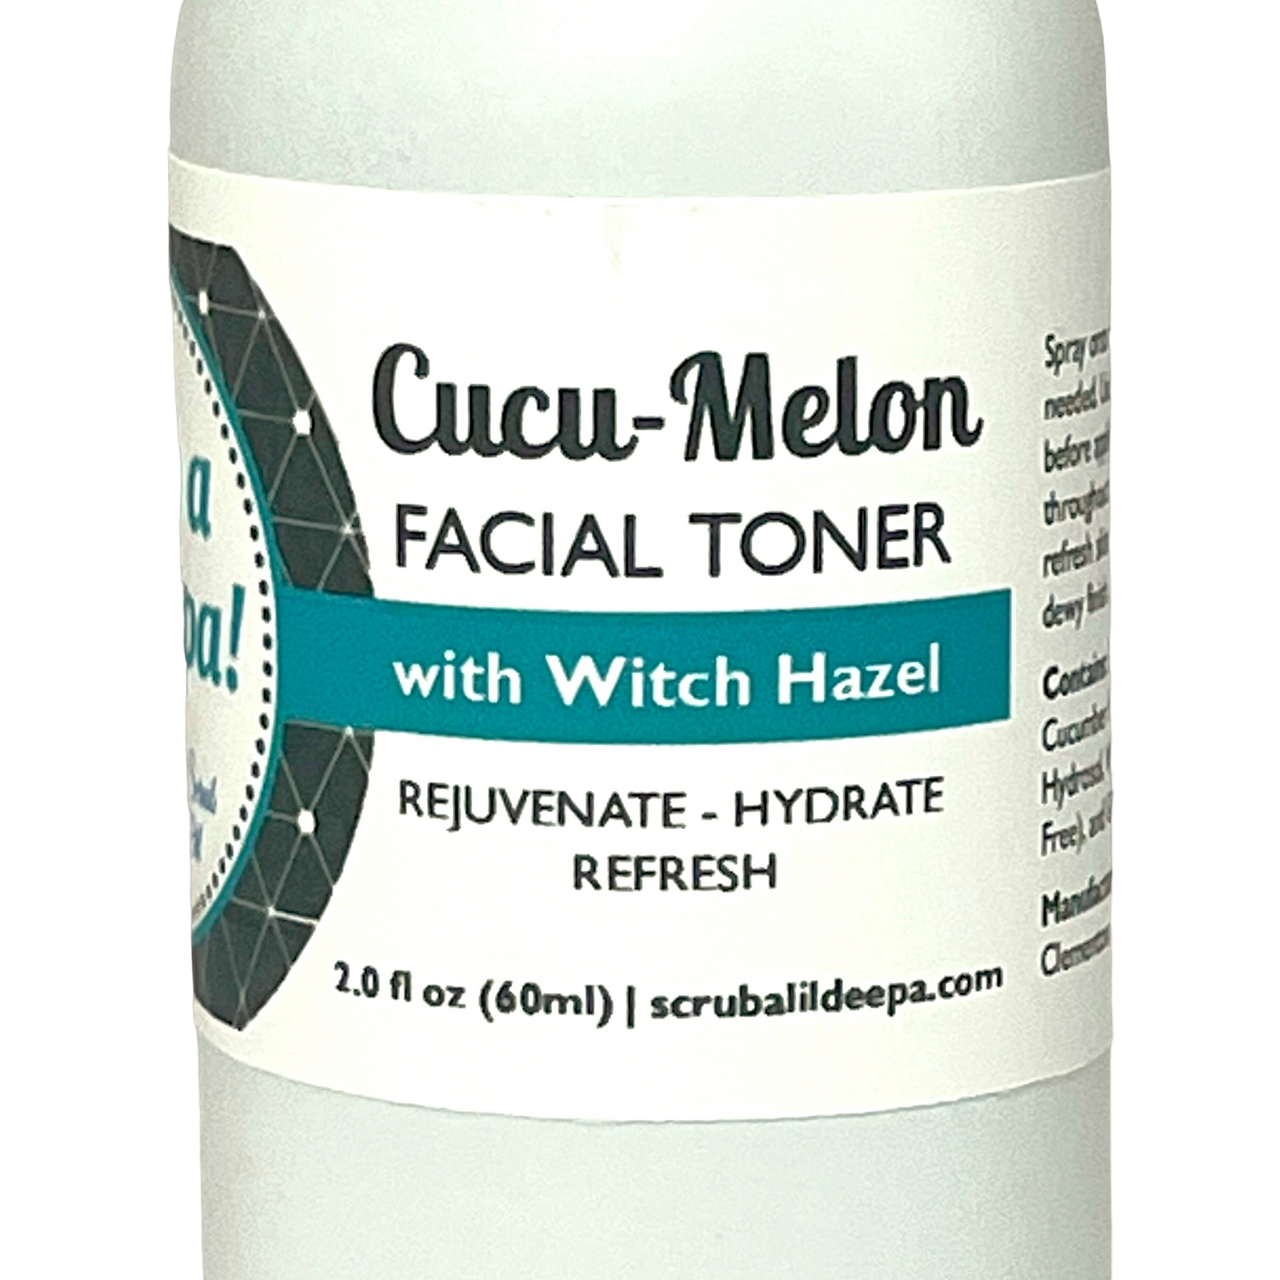 Toner - Cucumber, Watermelon and Witch Hazel